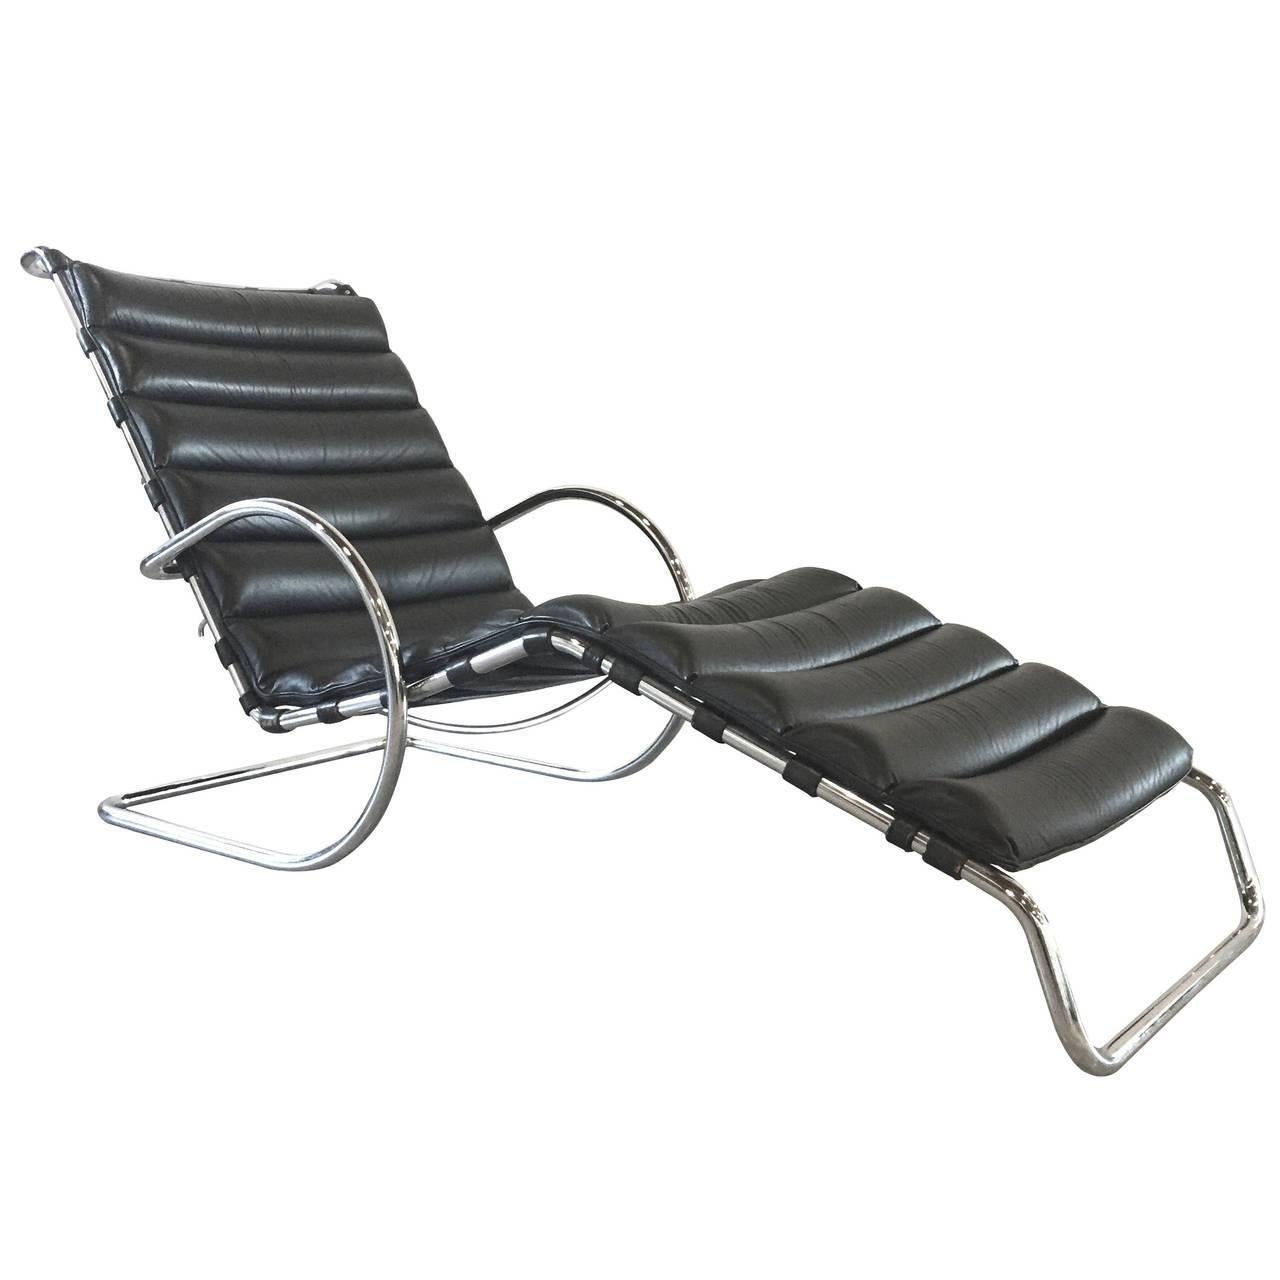 MR Chaise Lounge Chair by Ludwig Mies van der Rohe, Rare Early Production